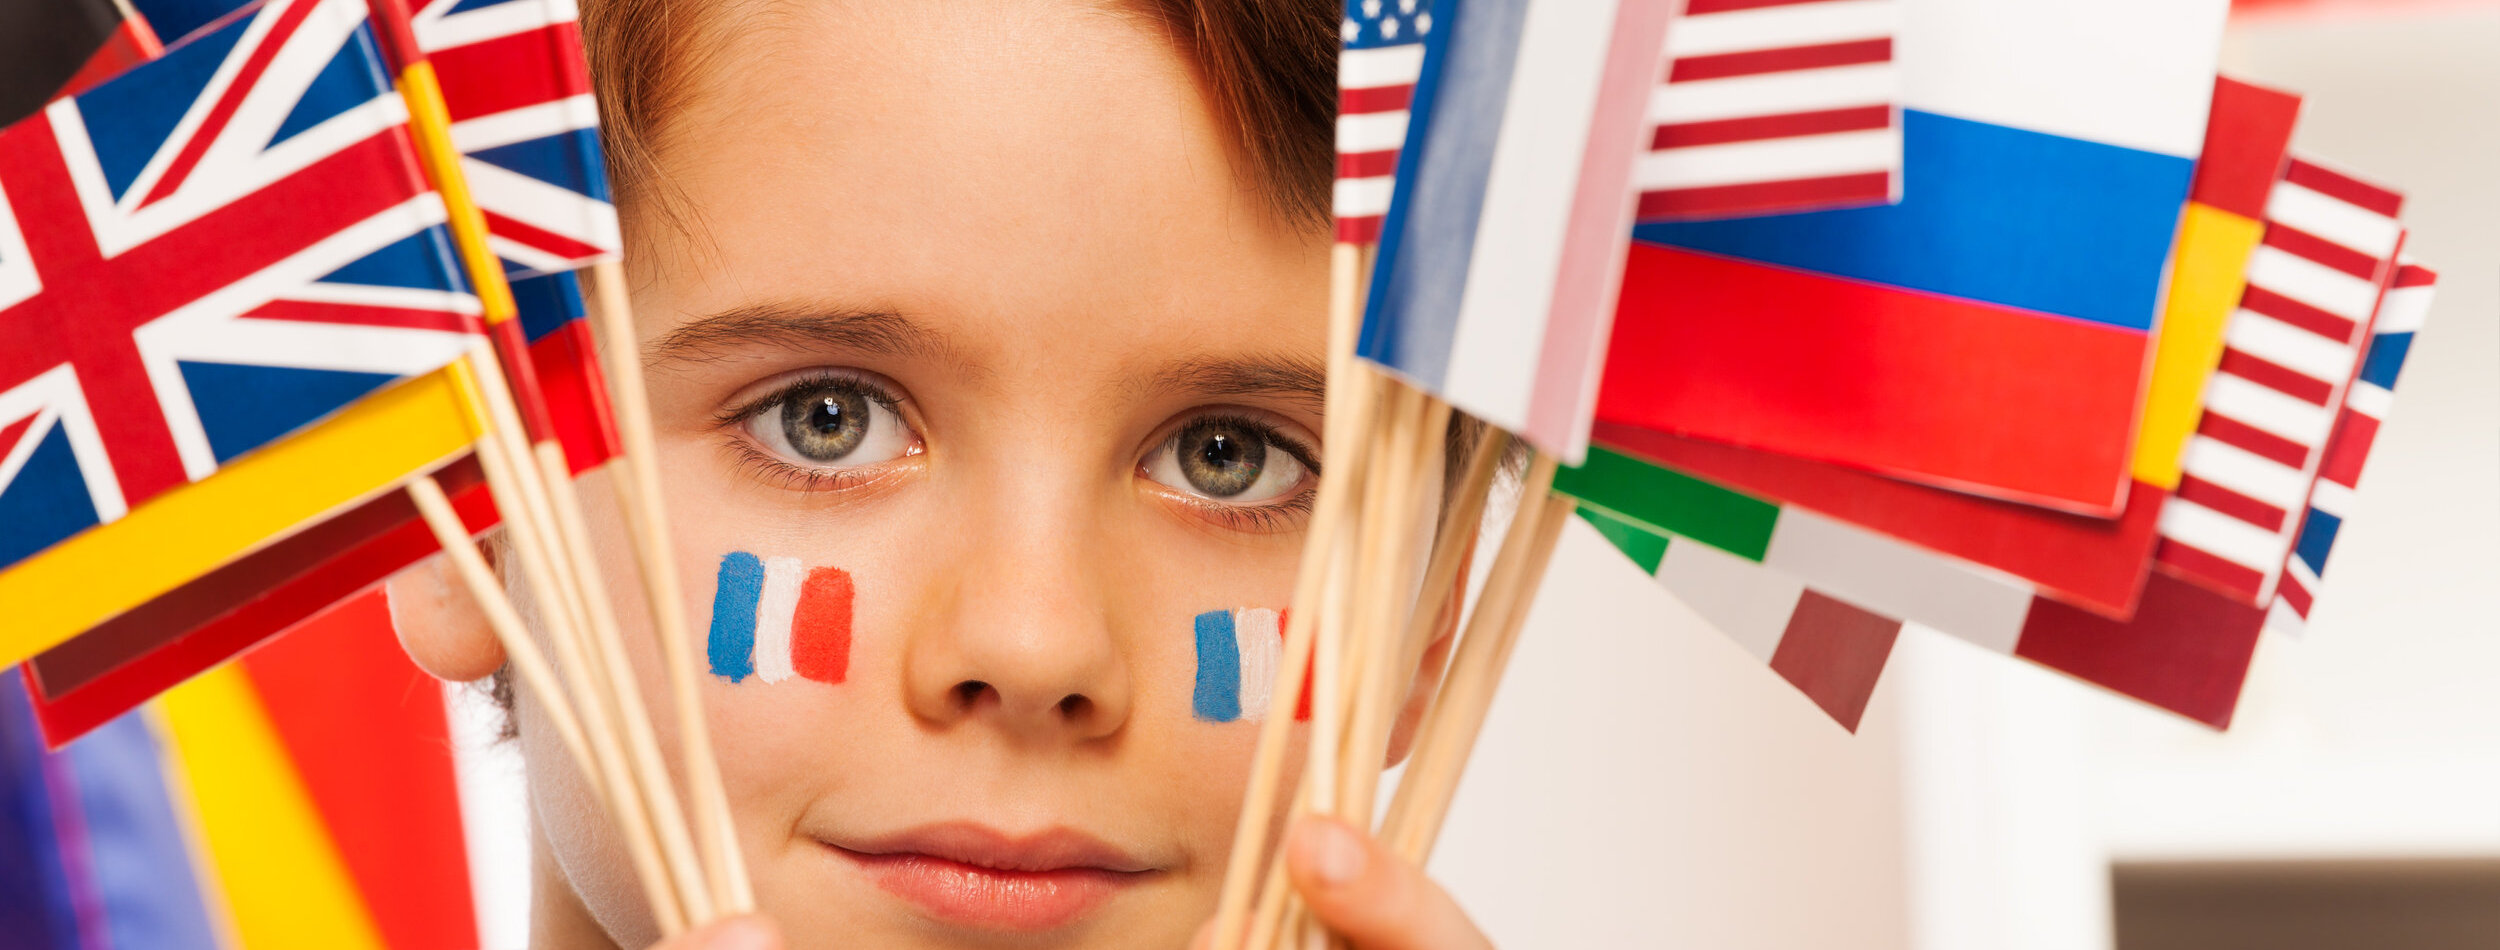 Close up picture of French boy with flags on cheeks hiding behind flags